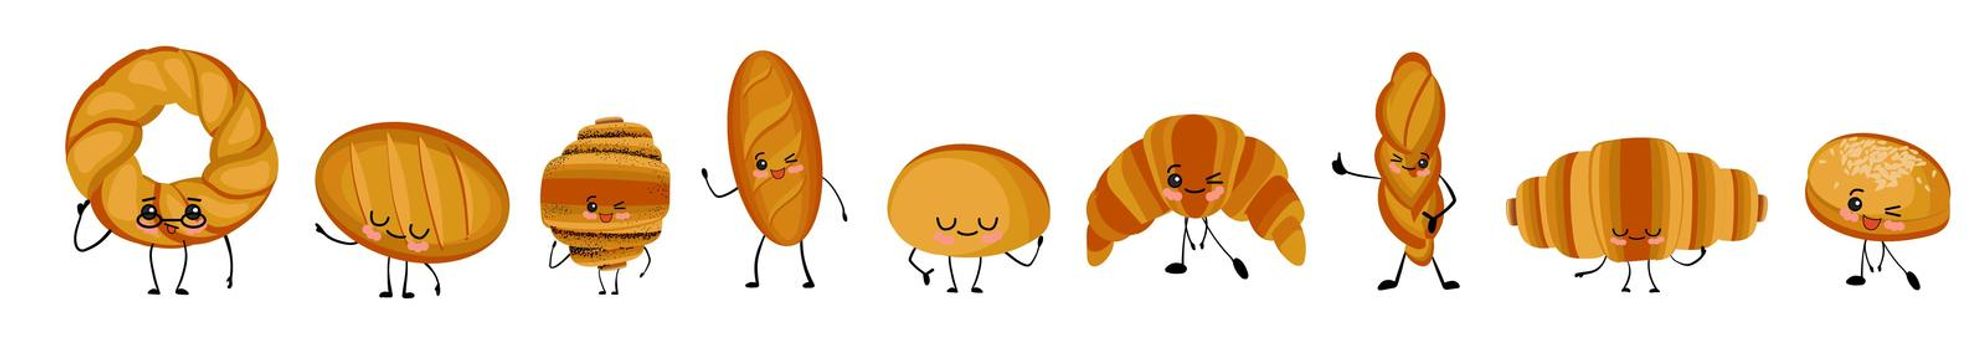 cute kawaii characters, bakery products. Baguette, loaf, bread with arms and legs vector.